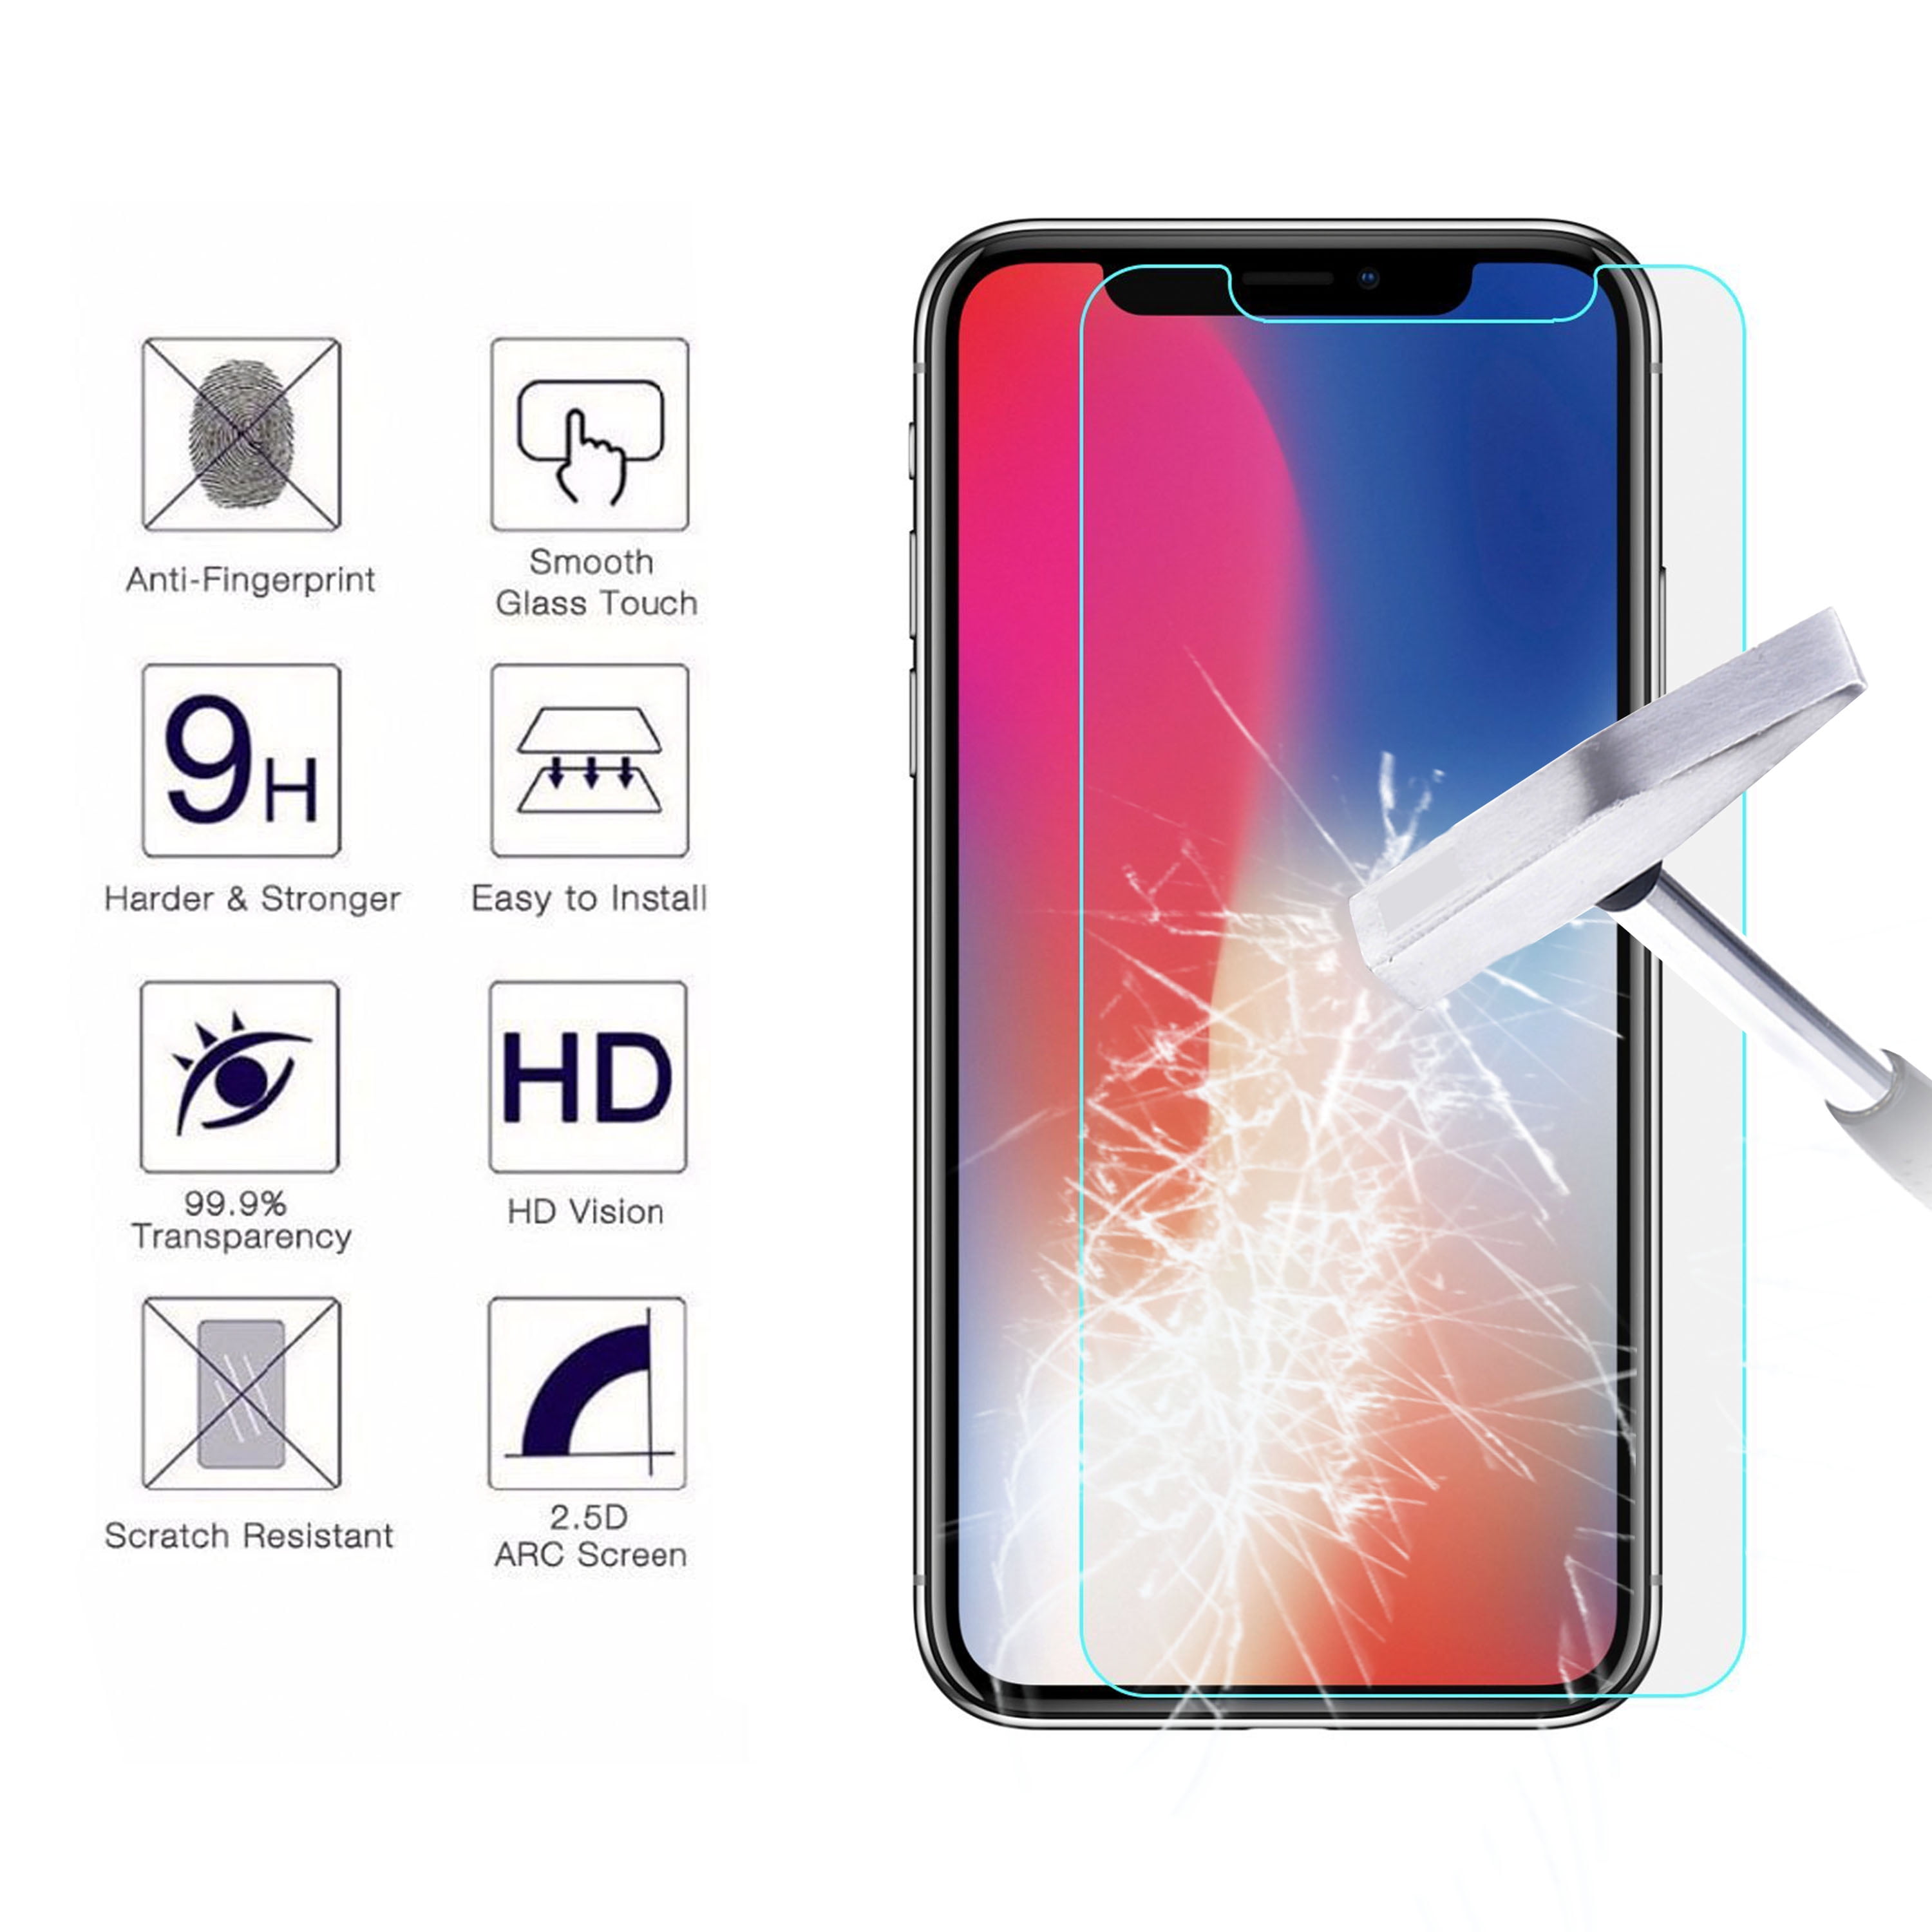 CUSKING 9H Hardness Screen Protector for Apple iPhone X/iPhone Xs 1 Pack Easy Installation iPhone X/iPhone Xs Tempered Glass Screen Protector Bubble Free 